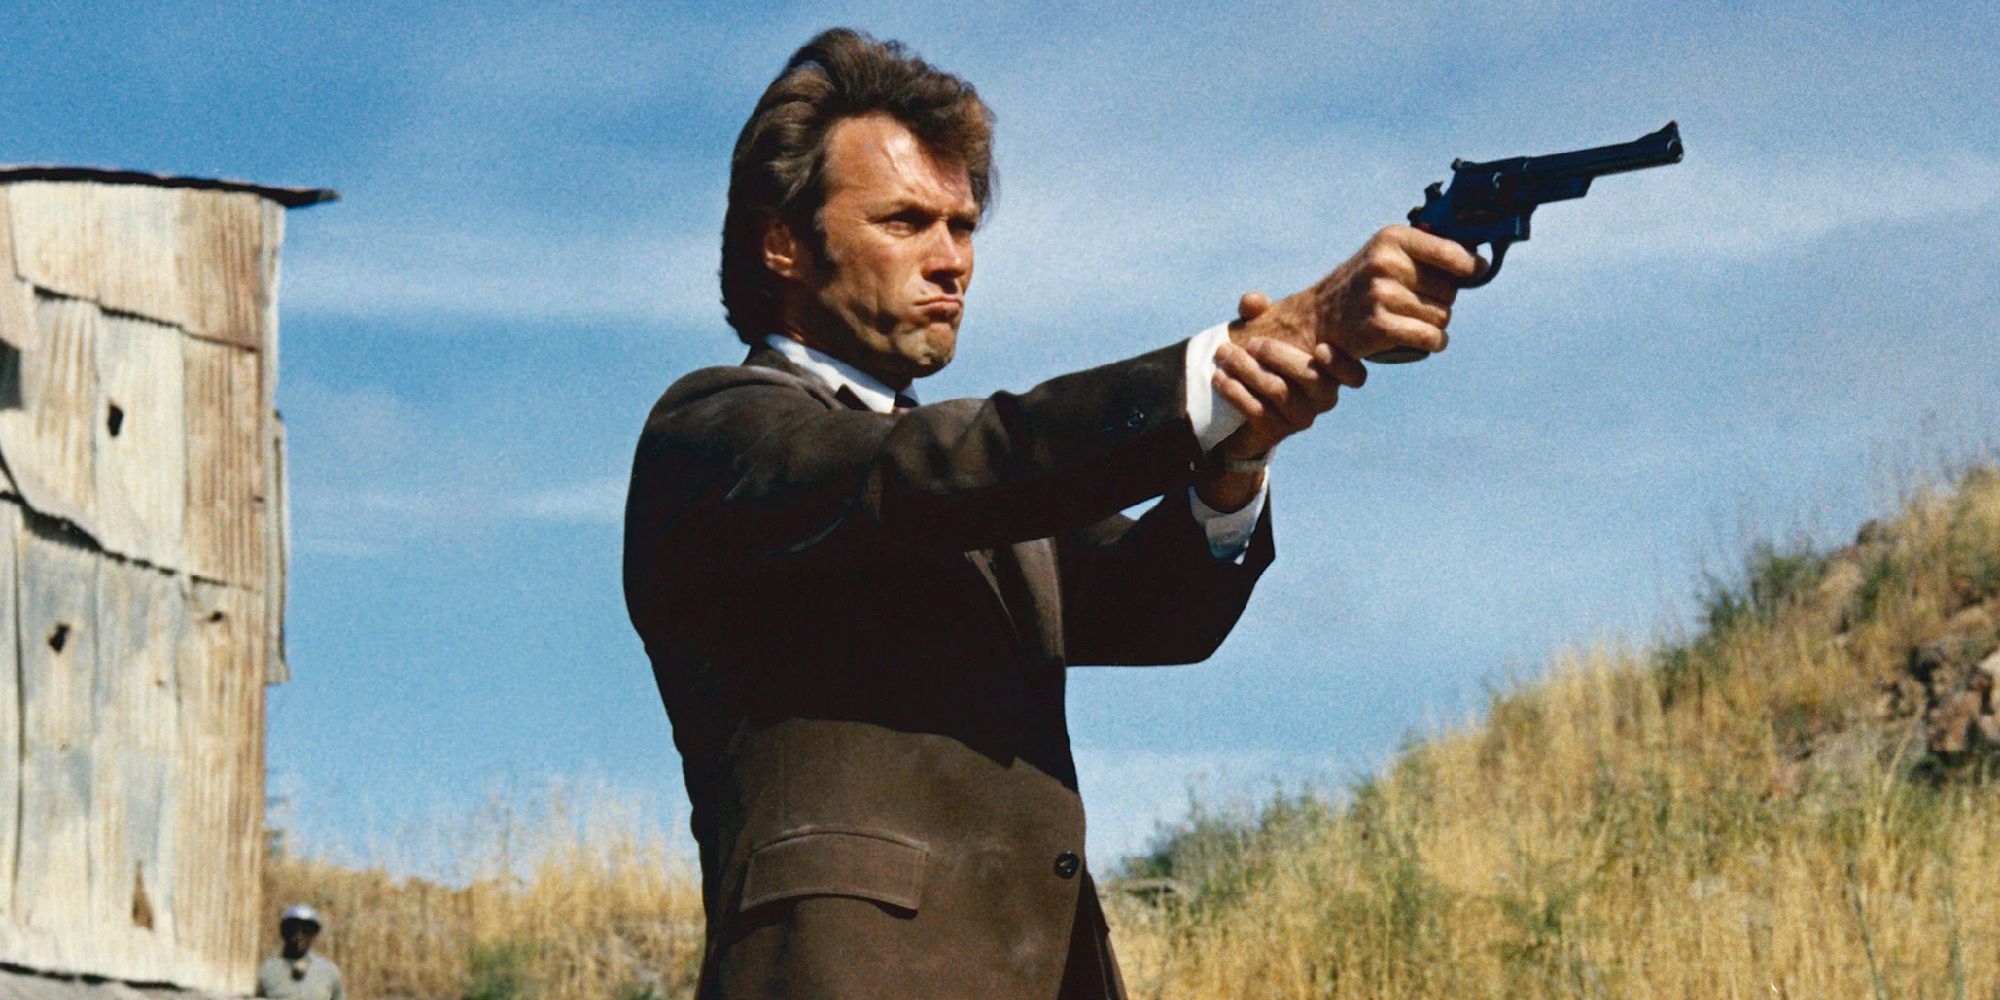 Clint Eastwood pointing a gun in Dirty Harry - 1971